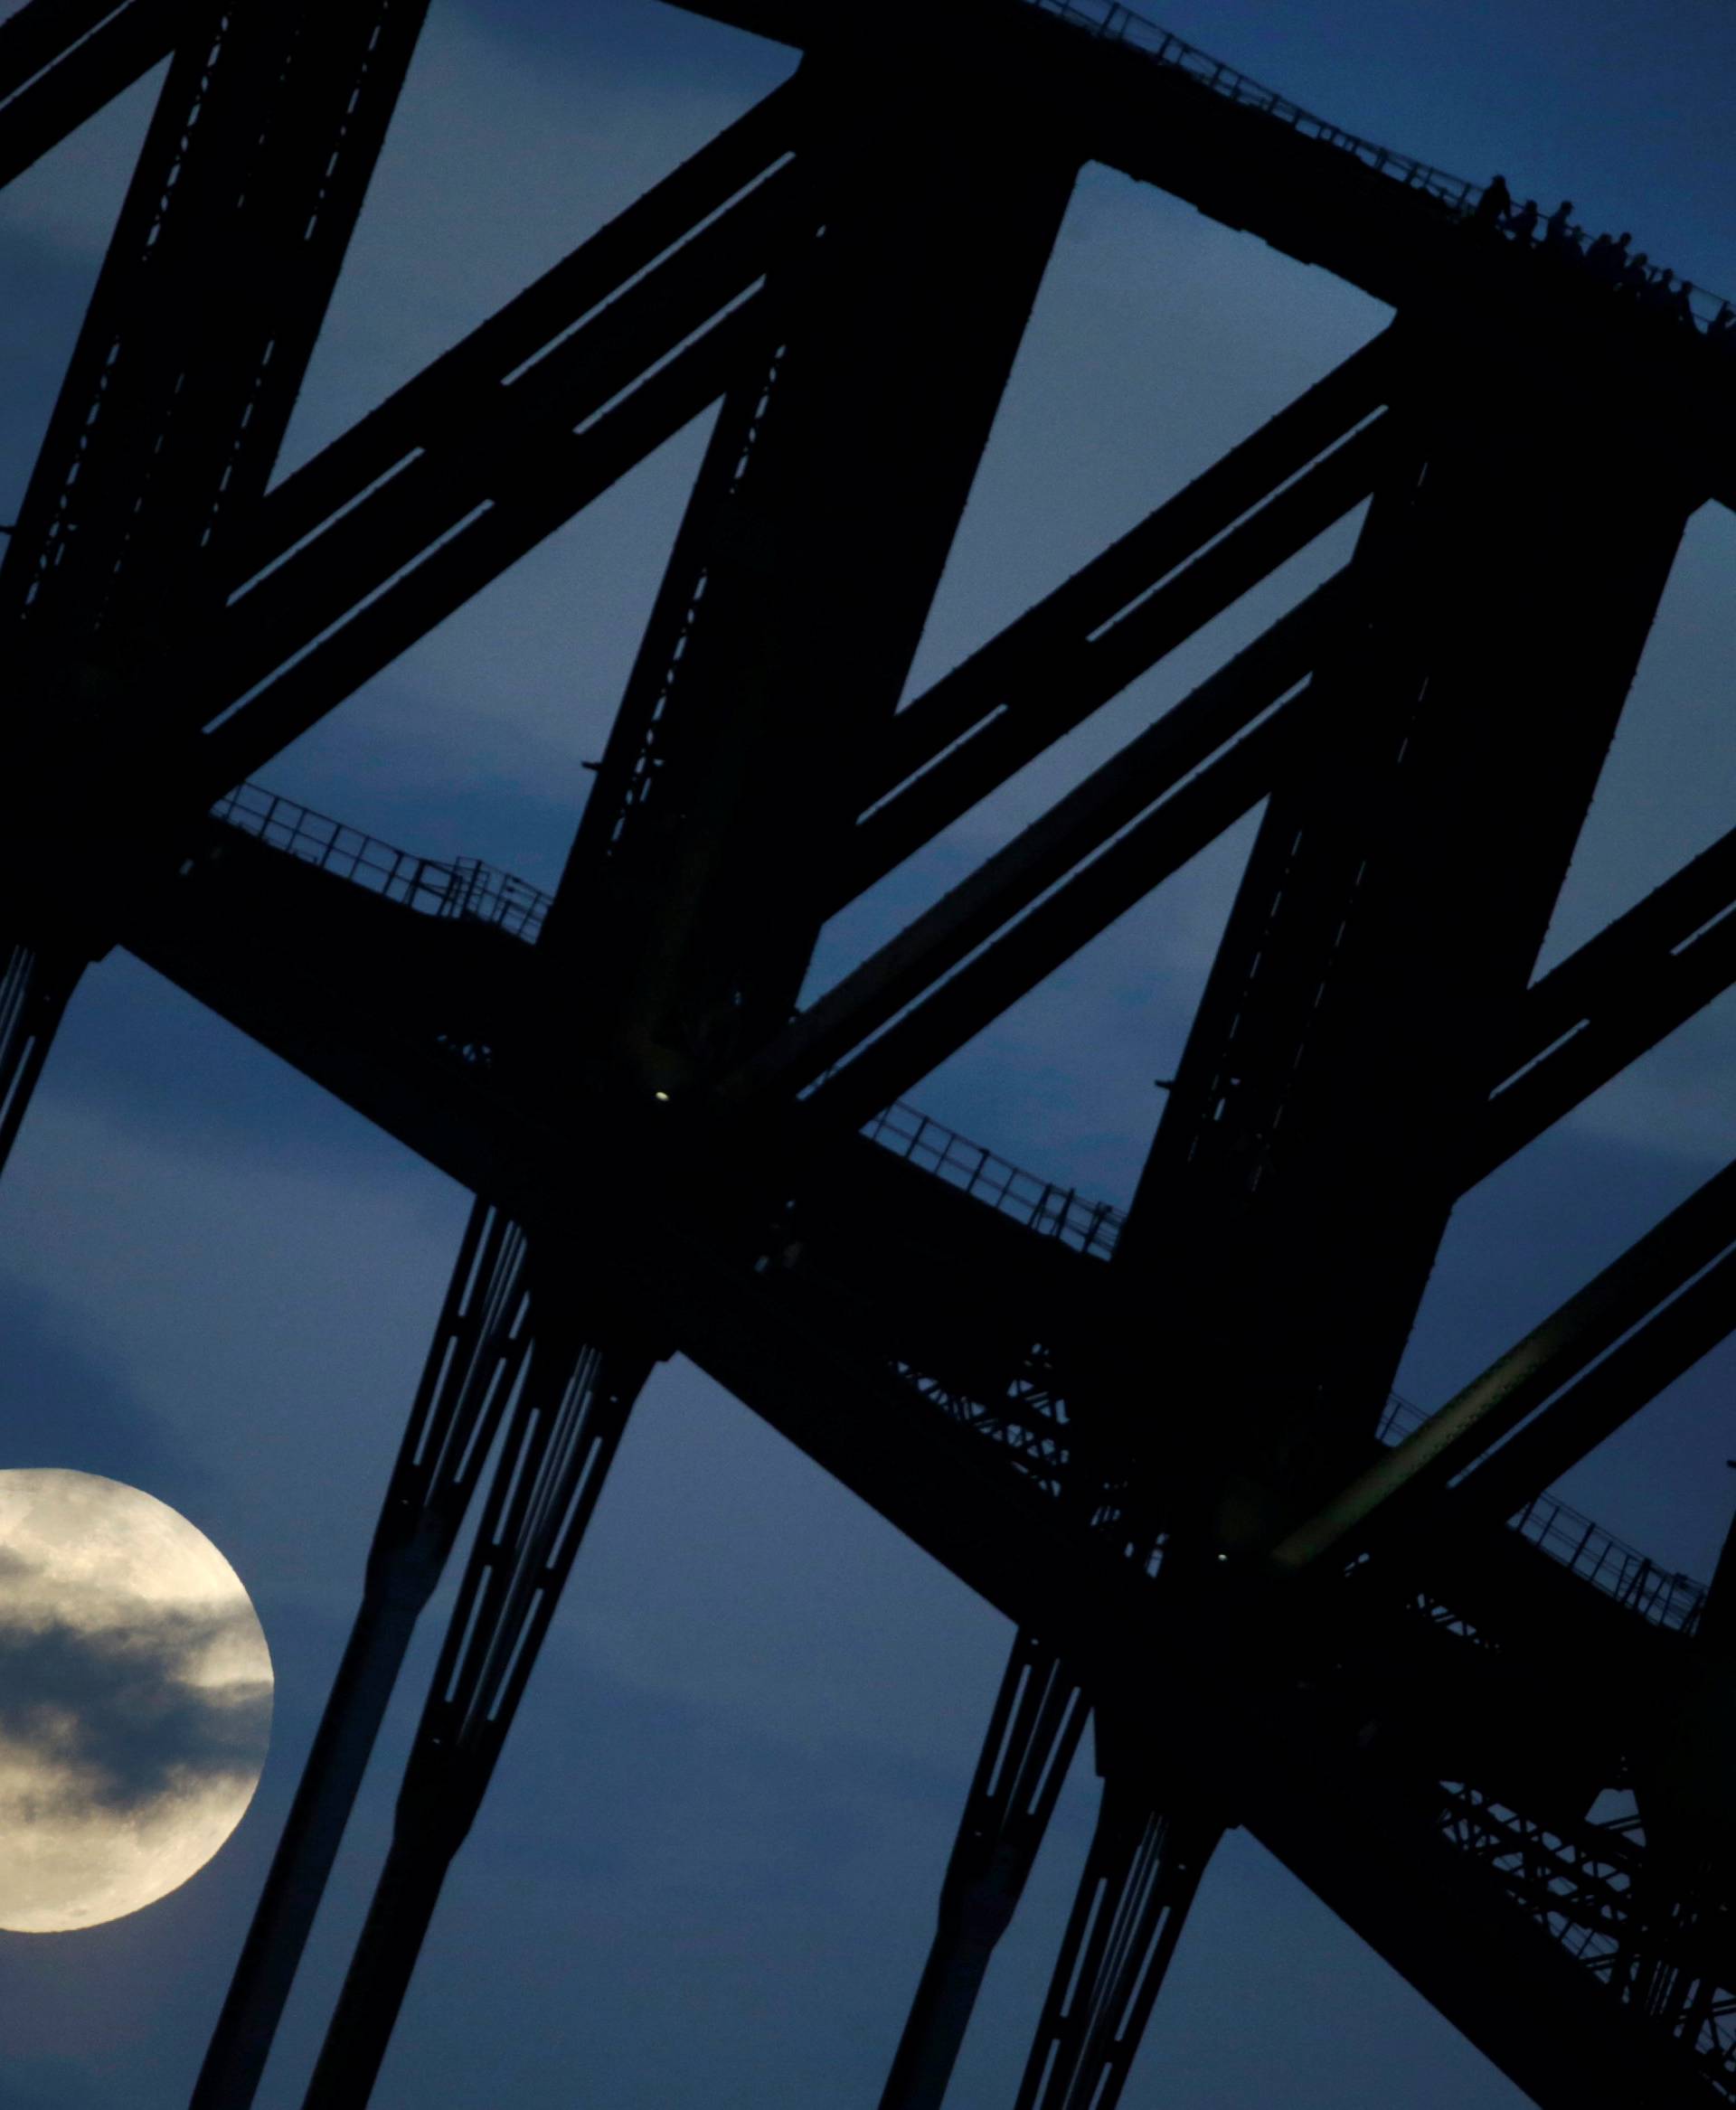 Participants in a Sydney Harbour Bridge Climb walk down the western span of the famous Australian landmark as the Super Moon rises through clouds after sunset